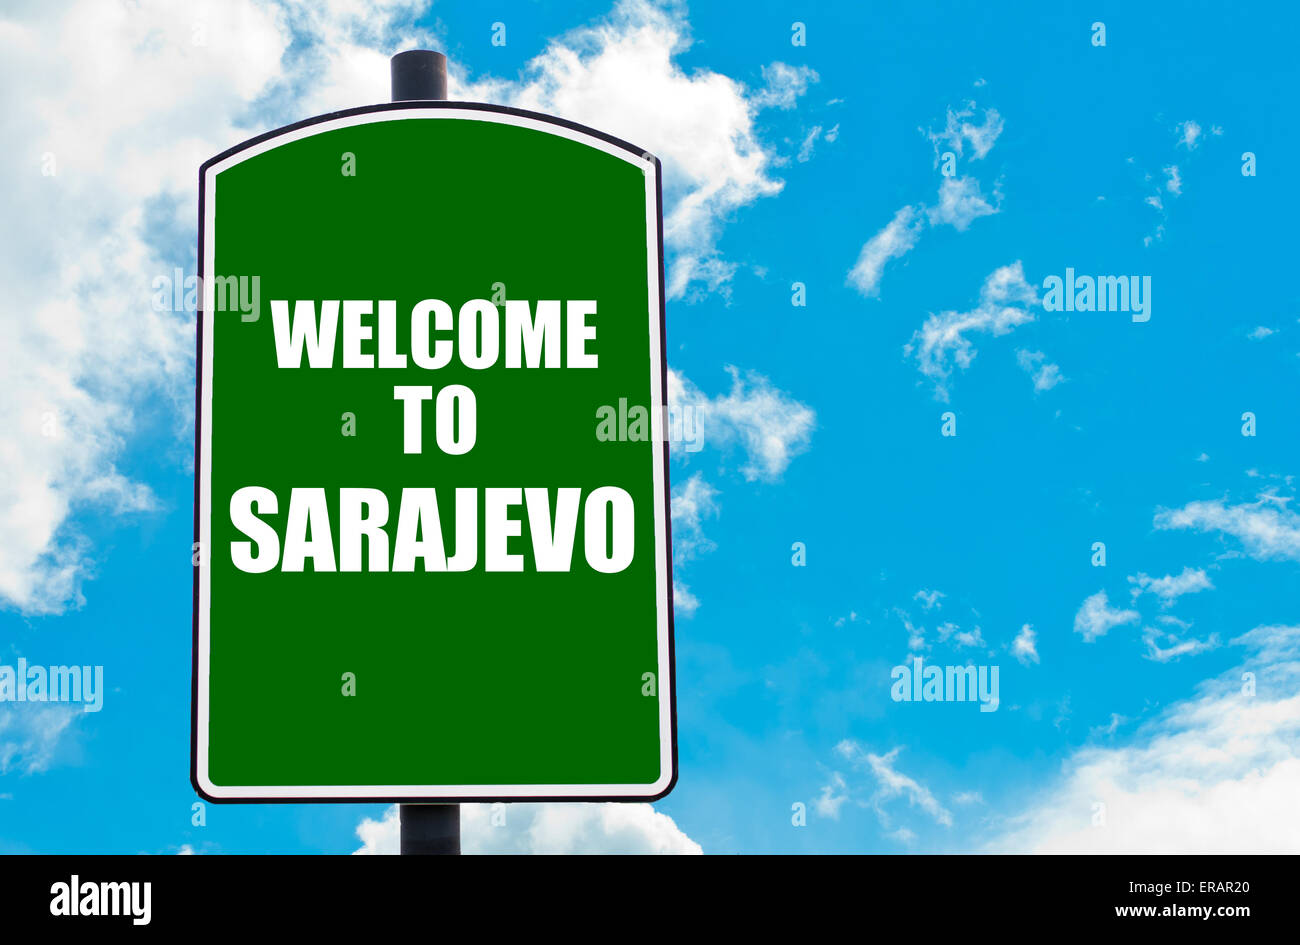 Green road sign with greeting message WELCOME TO SARAJEVO isolated over clear blue sky background with available copy space. Stock Photo